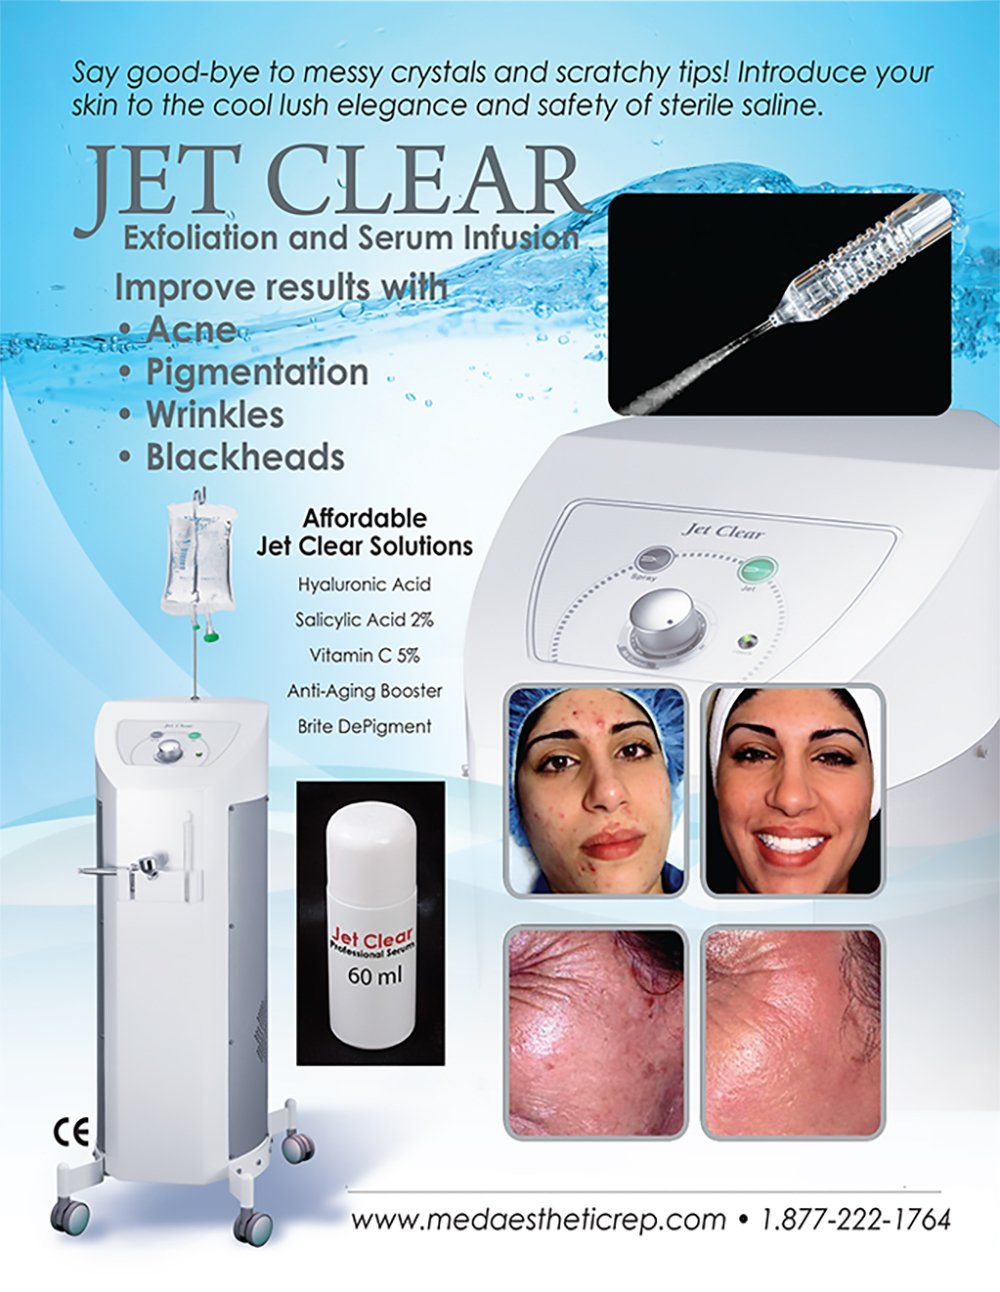 an advertisement for jet clear exfoliation and serum infusion